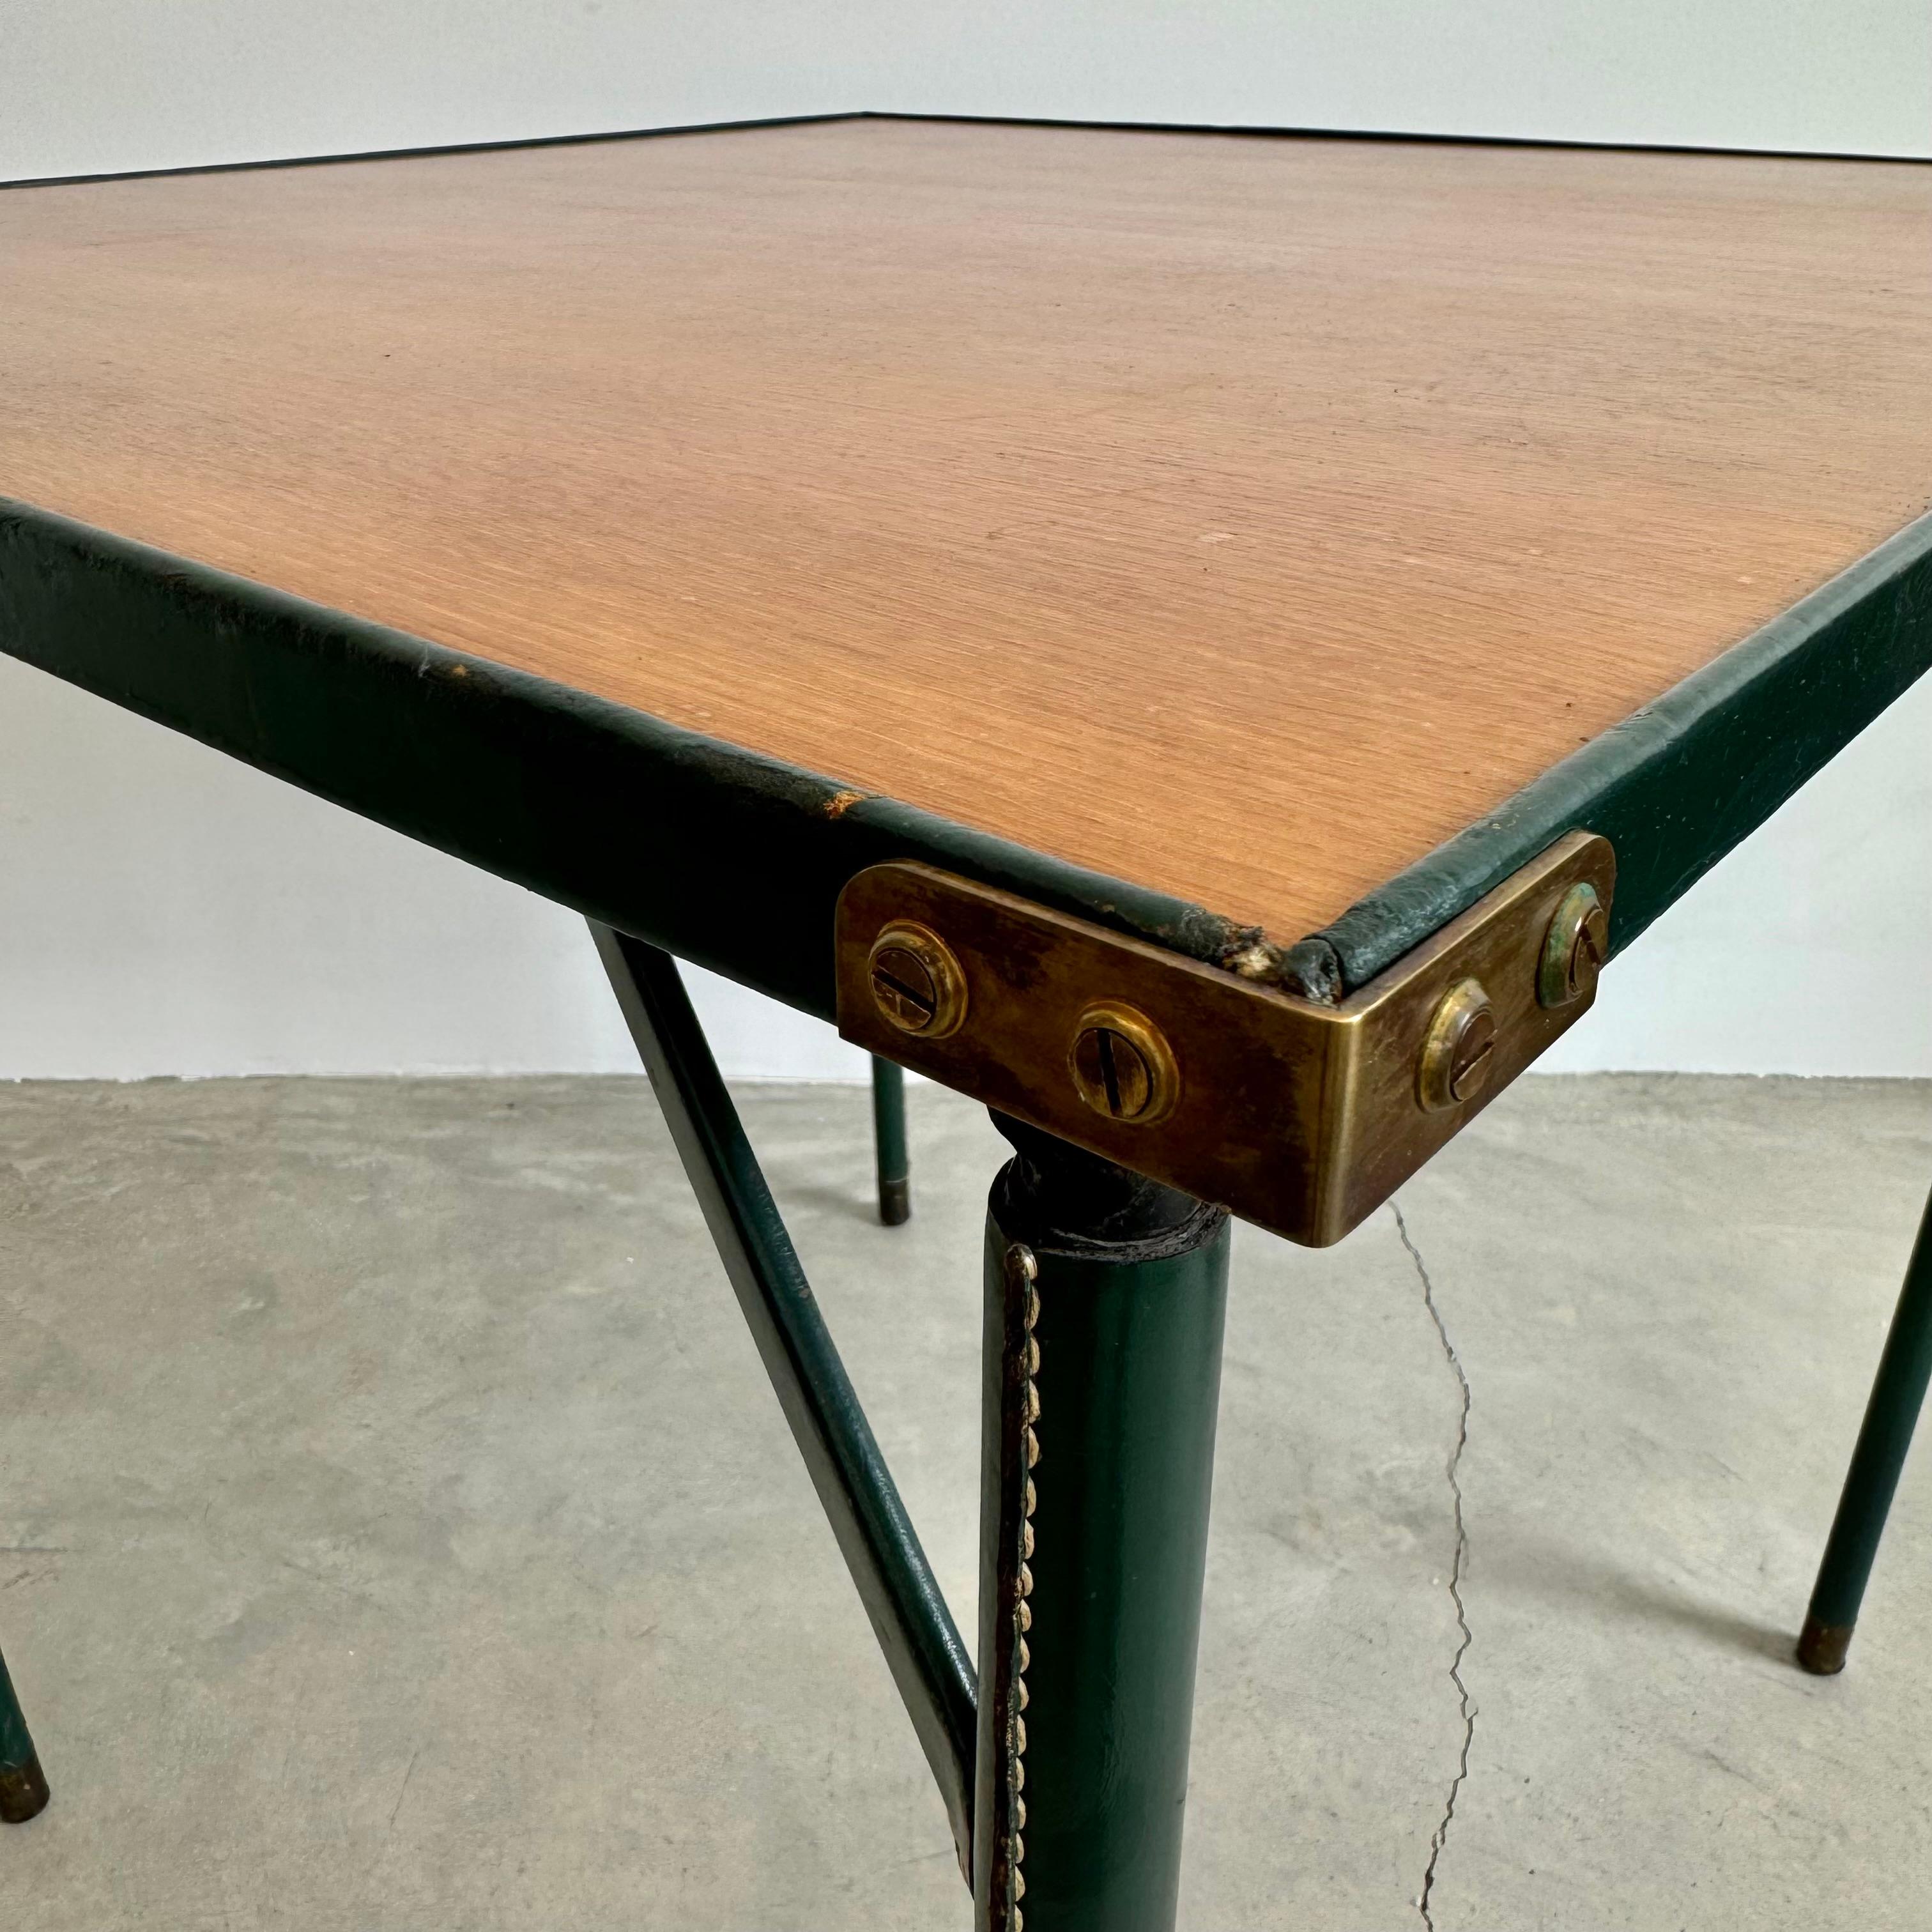 Mid-20th Century Jacques Adnet Green Leather and Wood Game Table, 1950s France For Sale